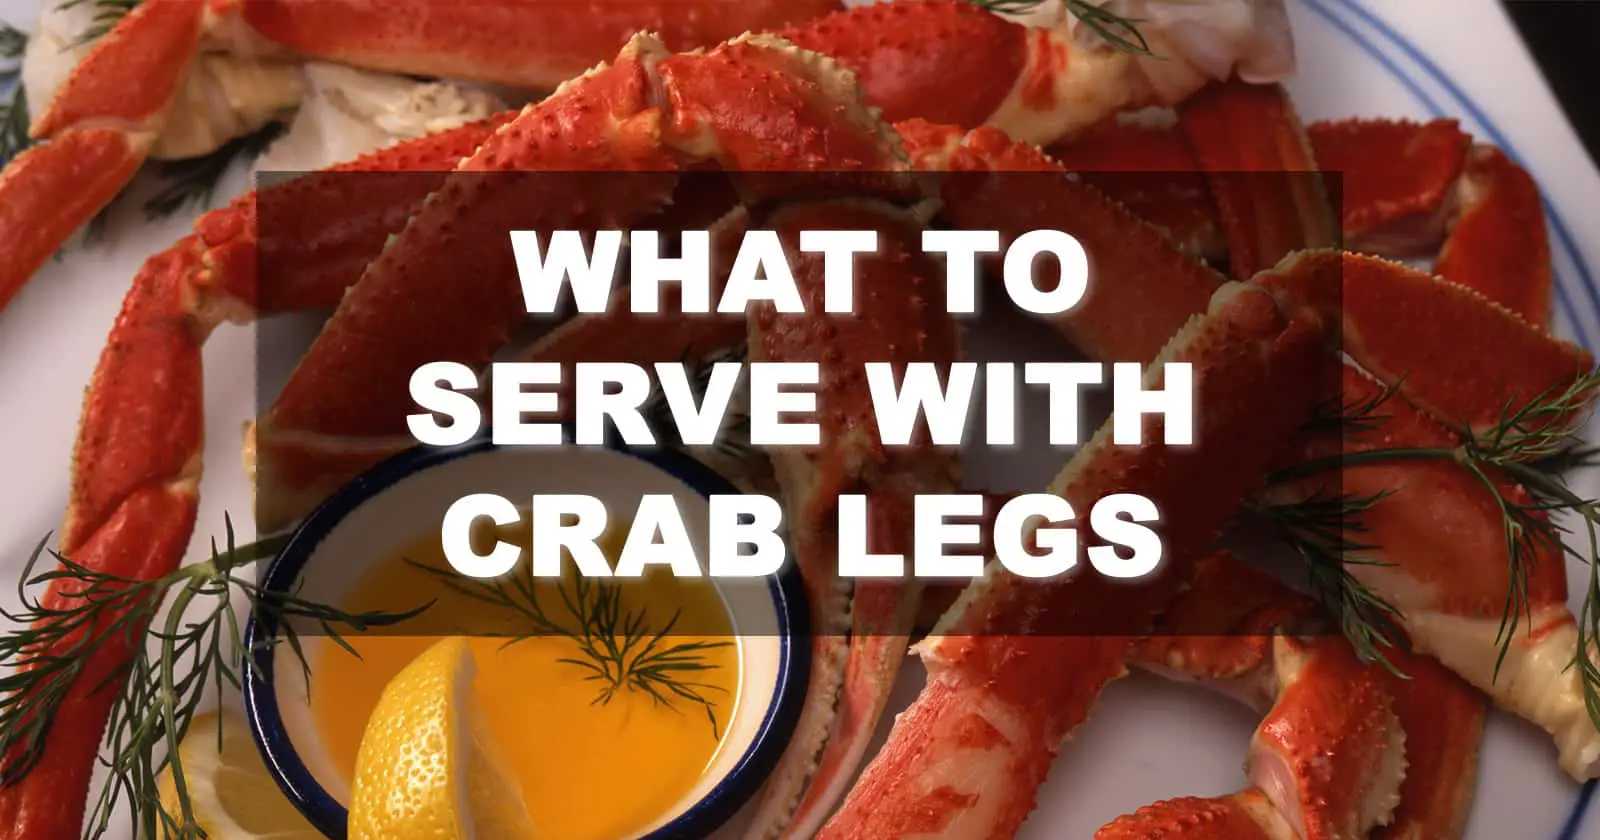 what goes well with crab